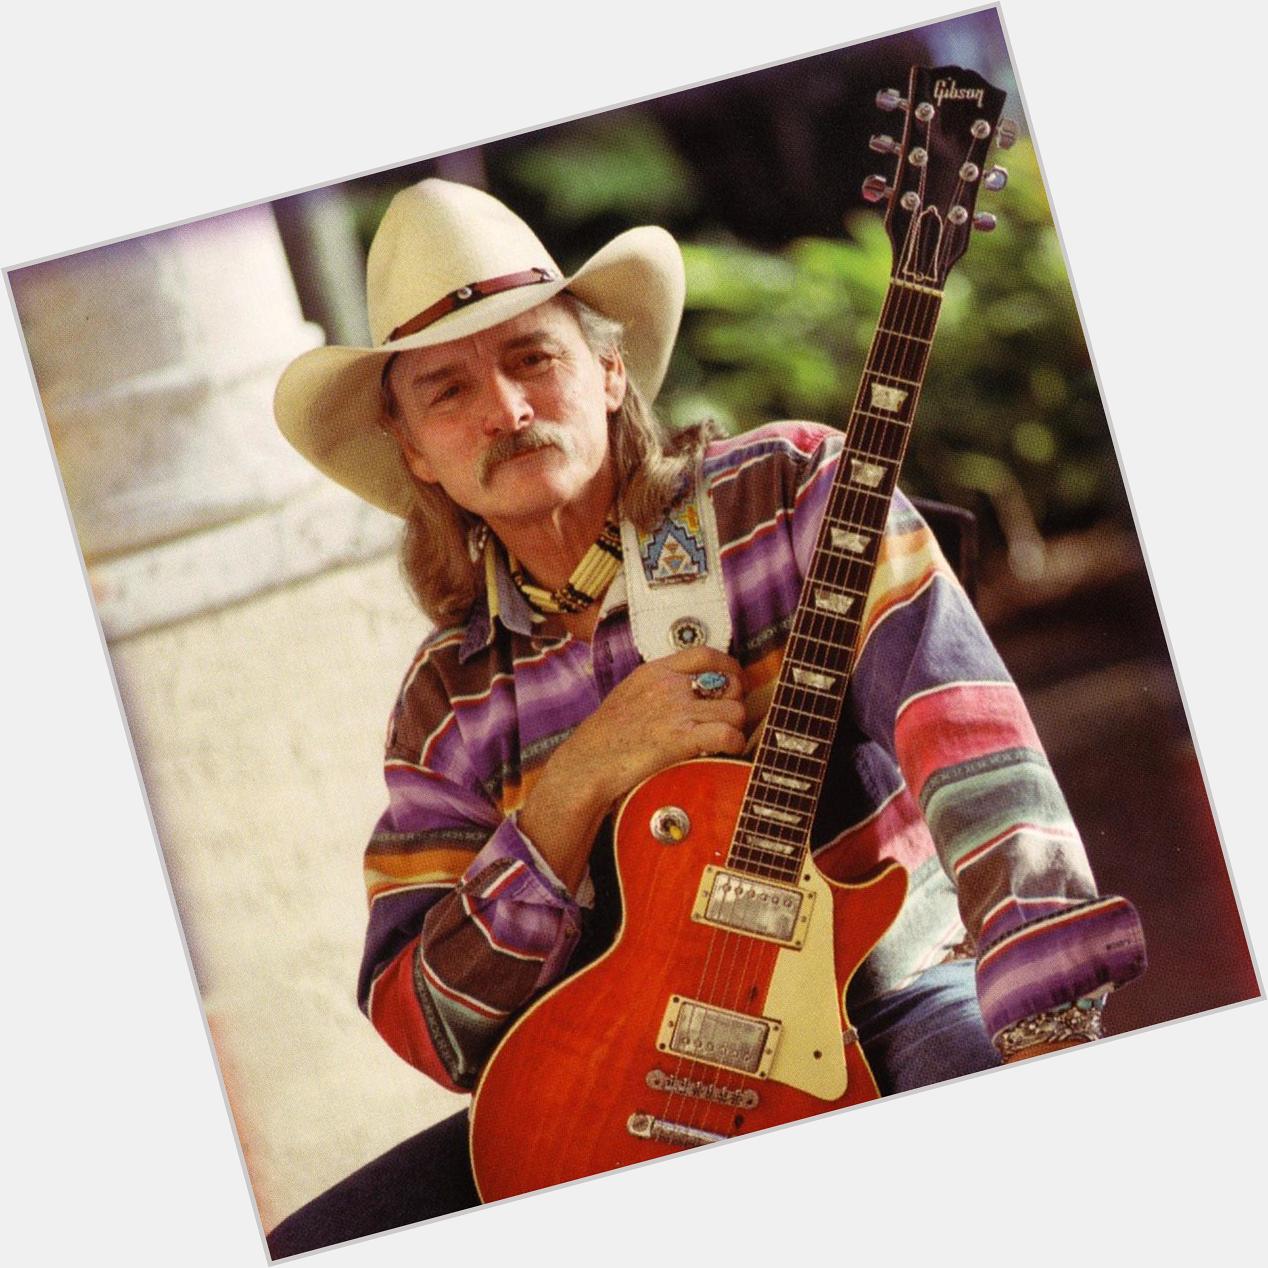  Happy Birthday to Dickey Betts born on this date in 1943     